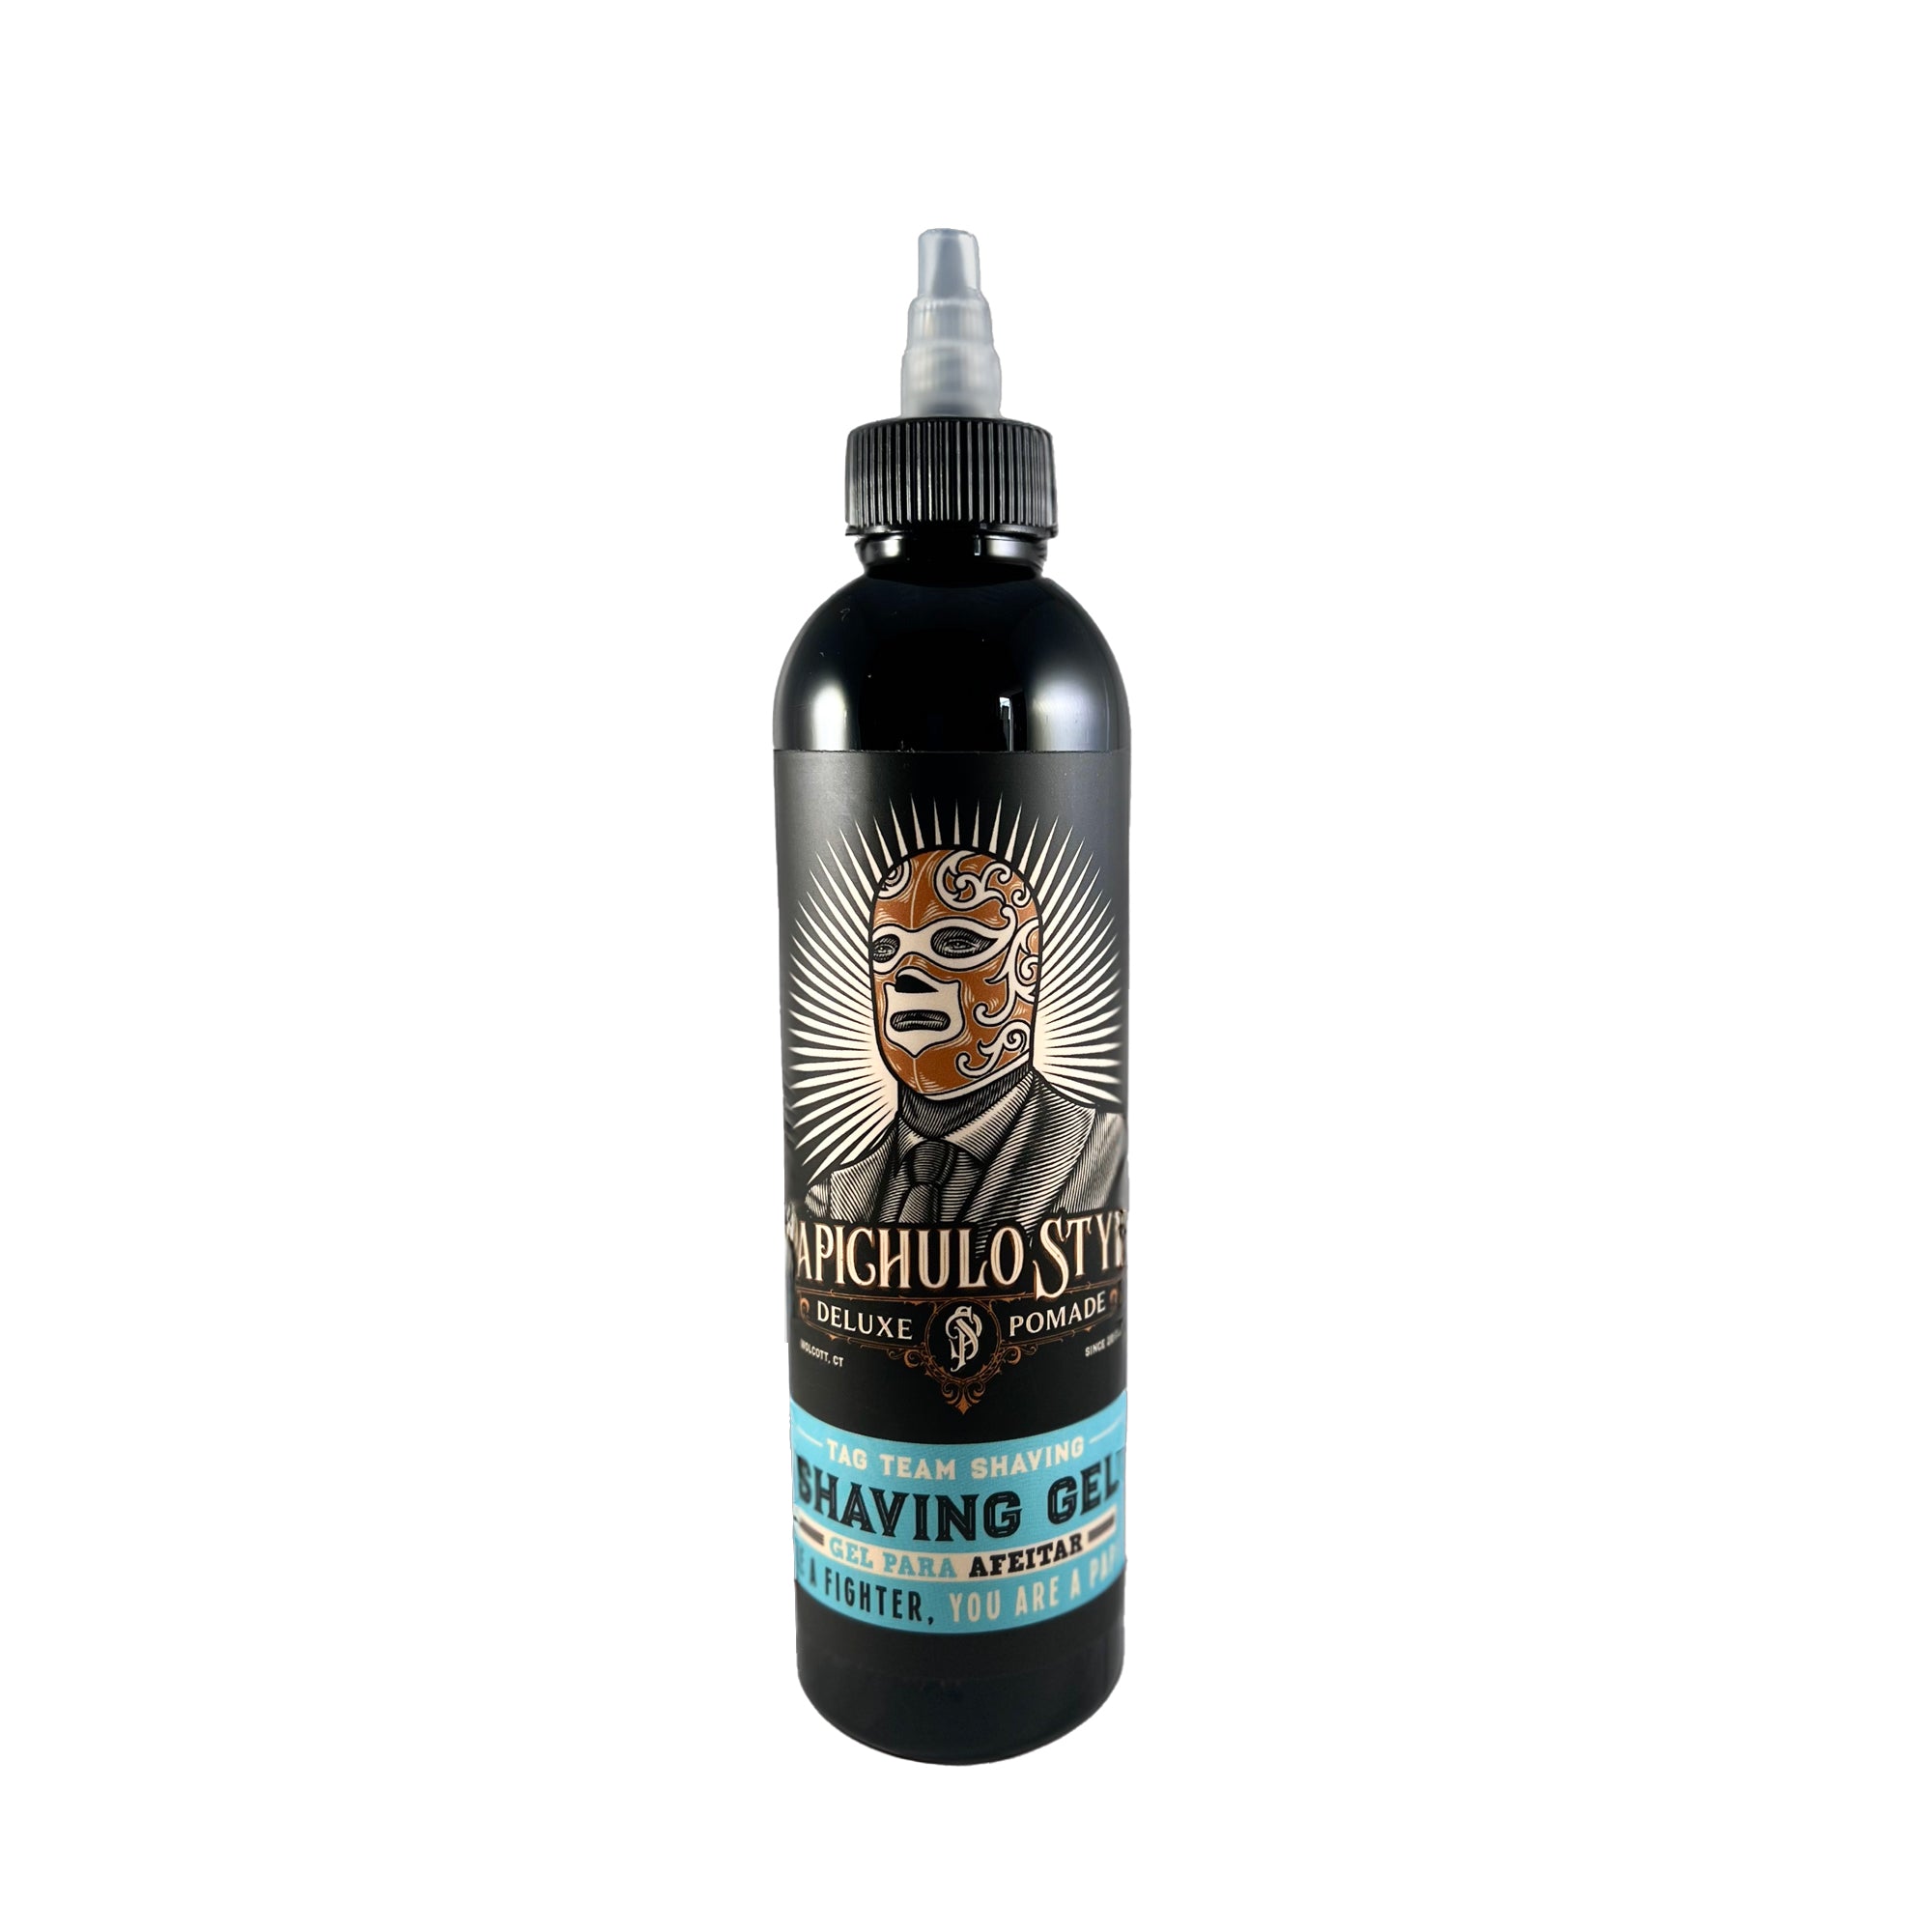 Papichulo Style Shaving Gel - Papichulo Style